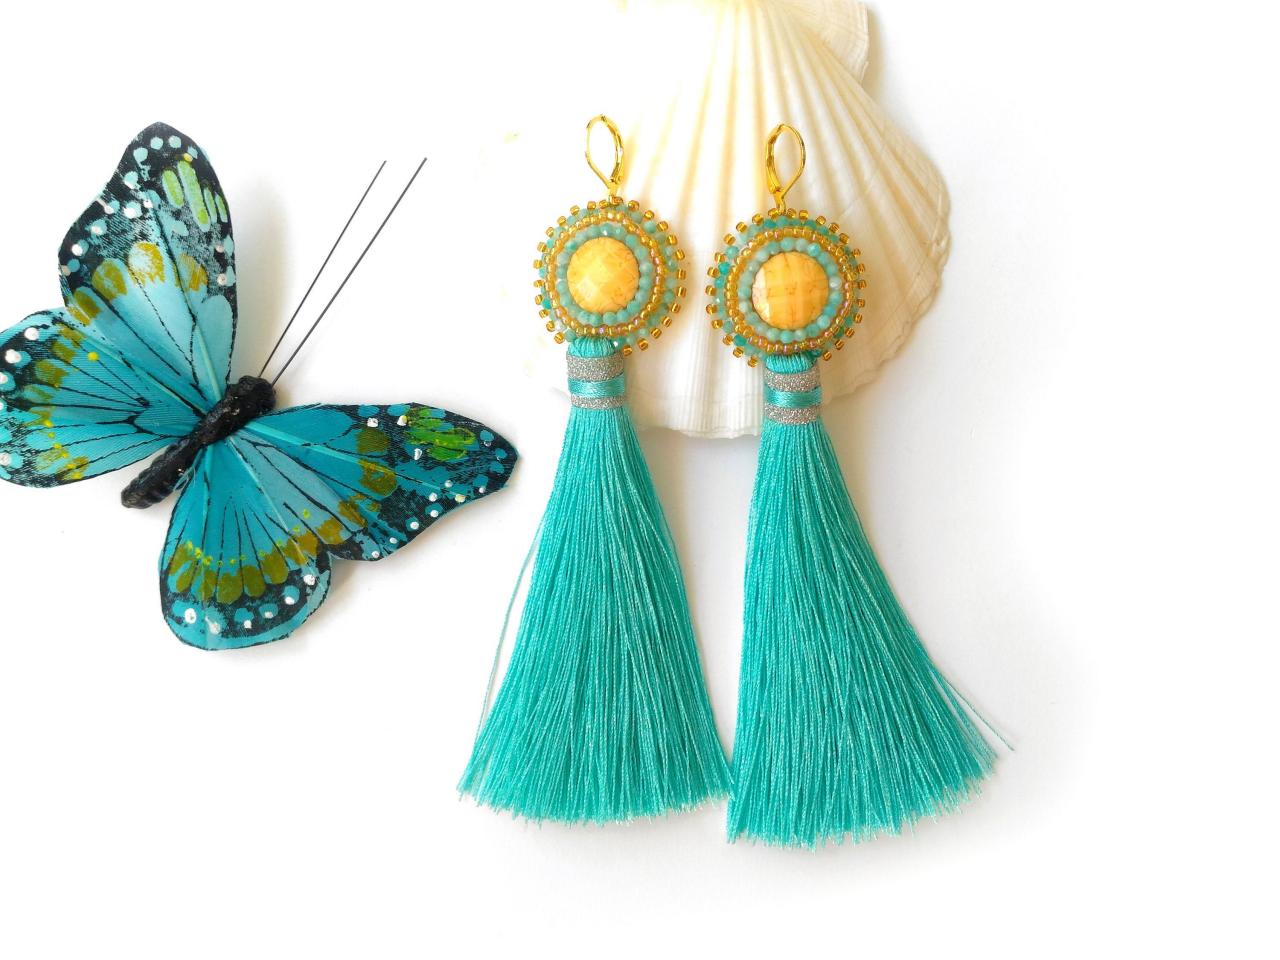 Long Tassel Earrings With Amazonite Gemstone, Turquoise And Yellow Bead Embroidery Earrings, Bohemian Statement Earrings With Cabochon